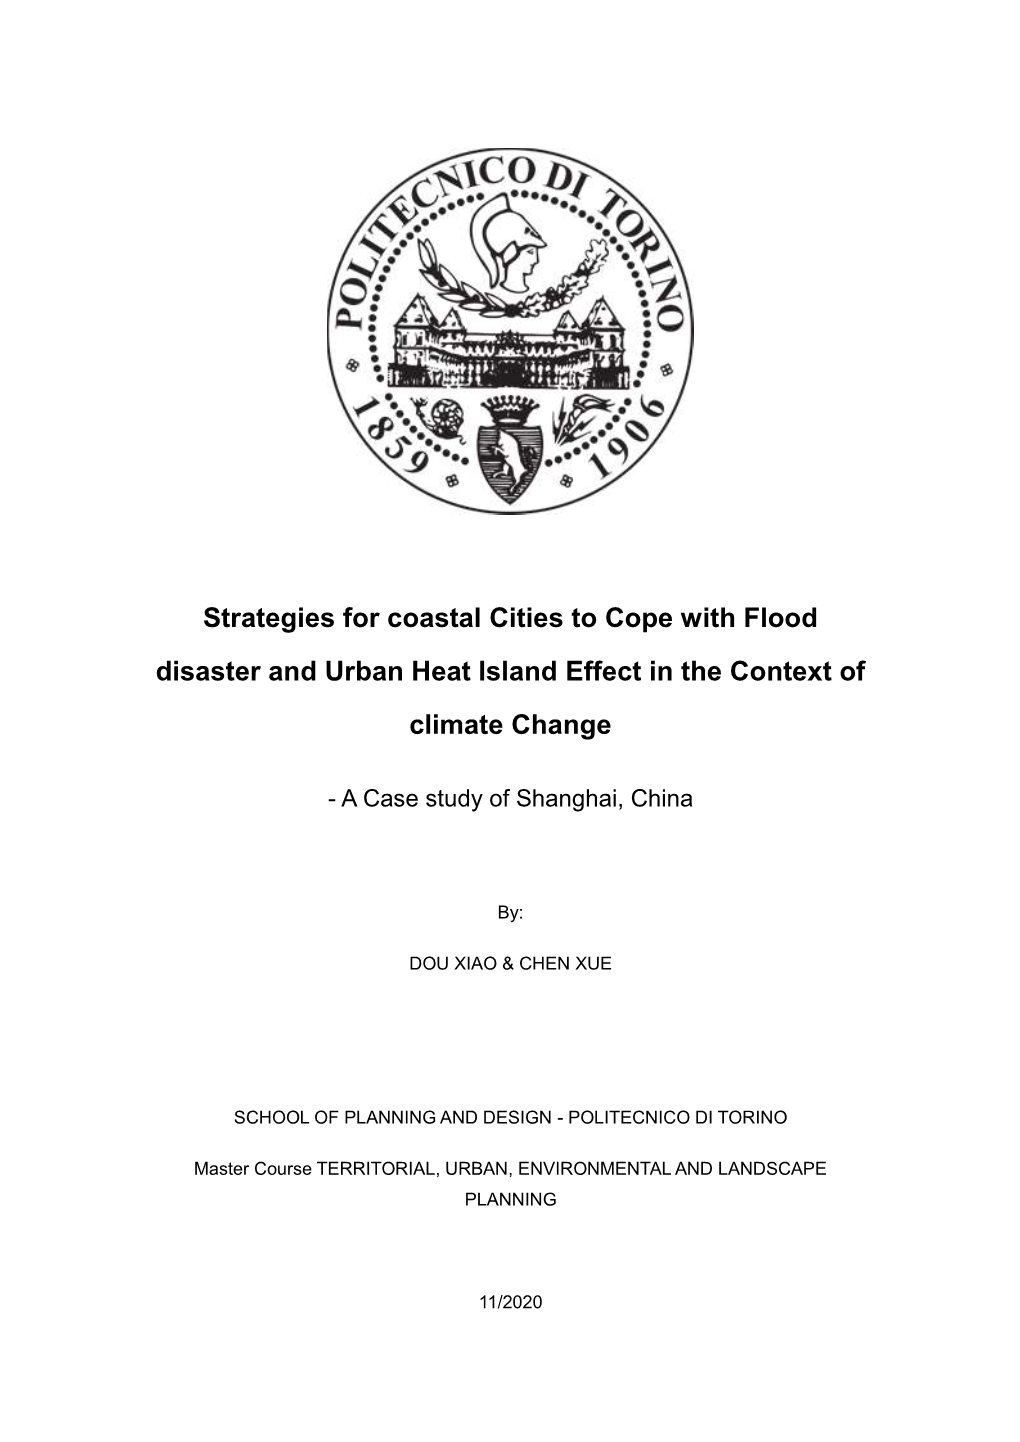 Strategies for Coastal Cities to Cope with Flood Disaster and Urban Heat Island Effect in the Context of Climate Change